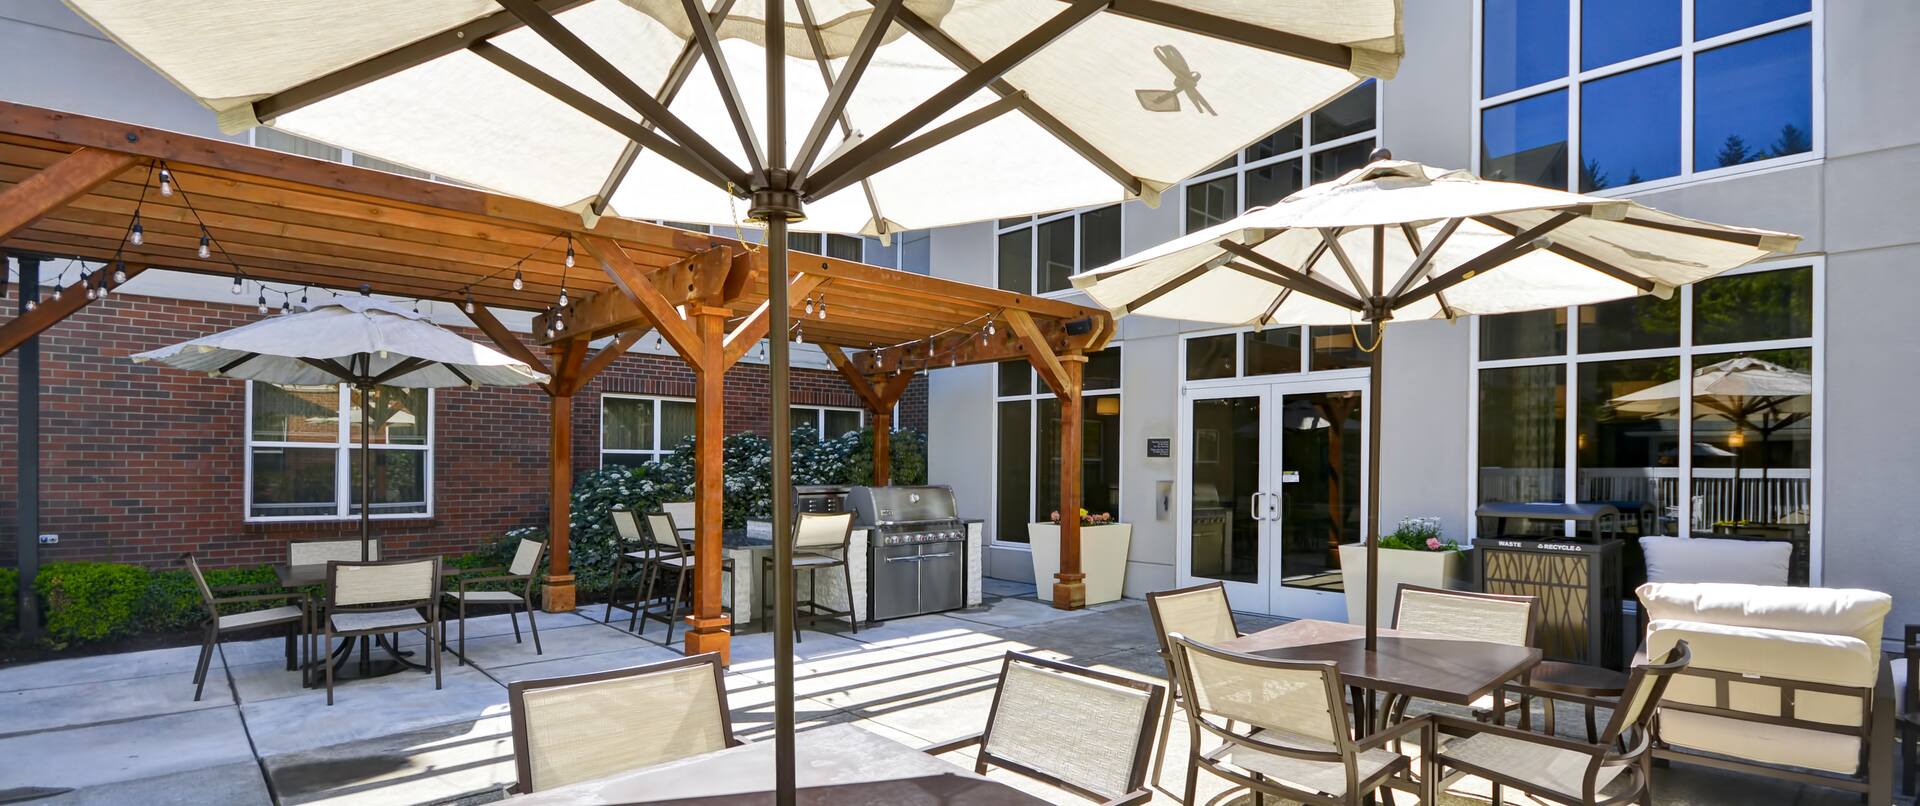 Patio Area with Seating and Umbrella Tables